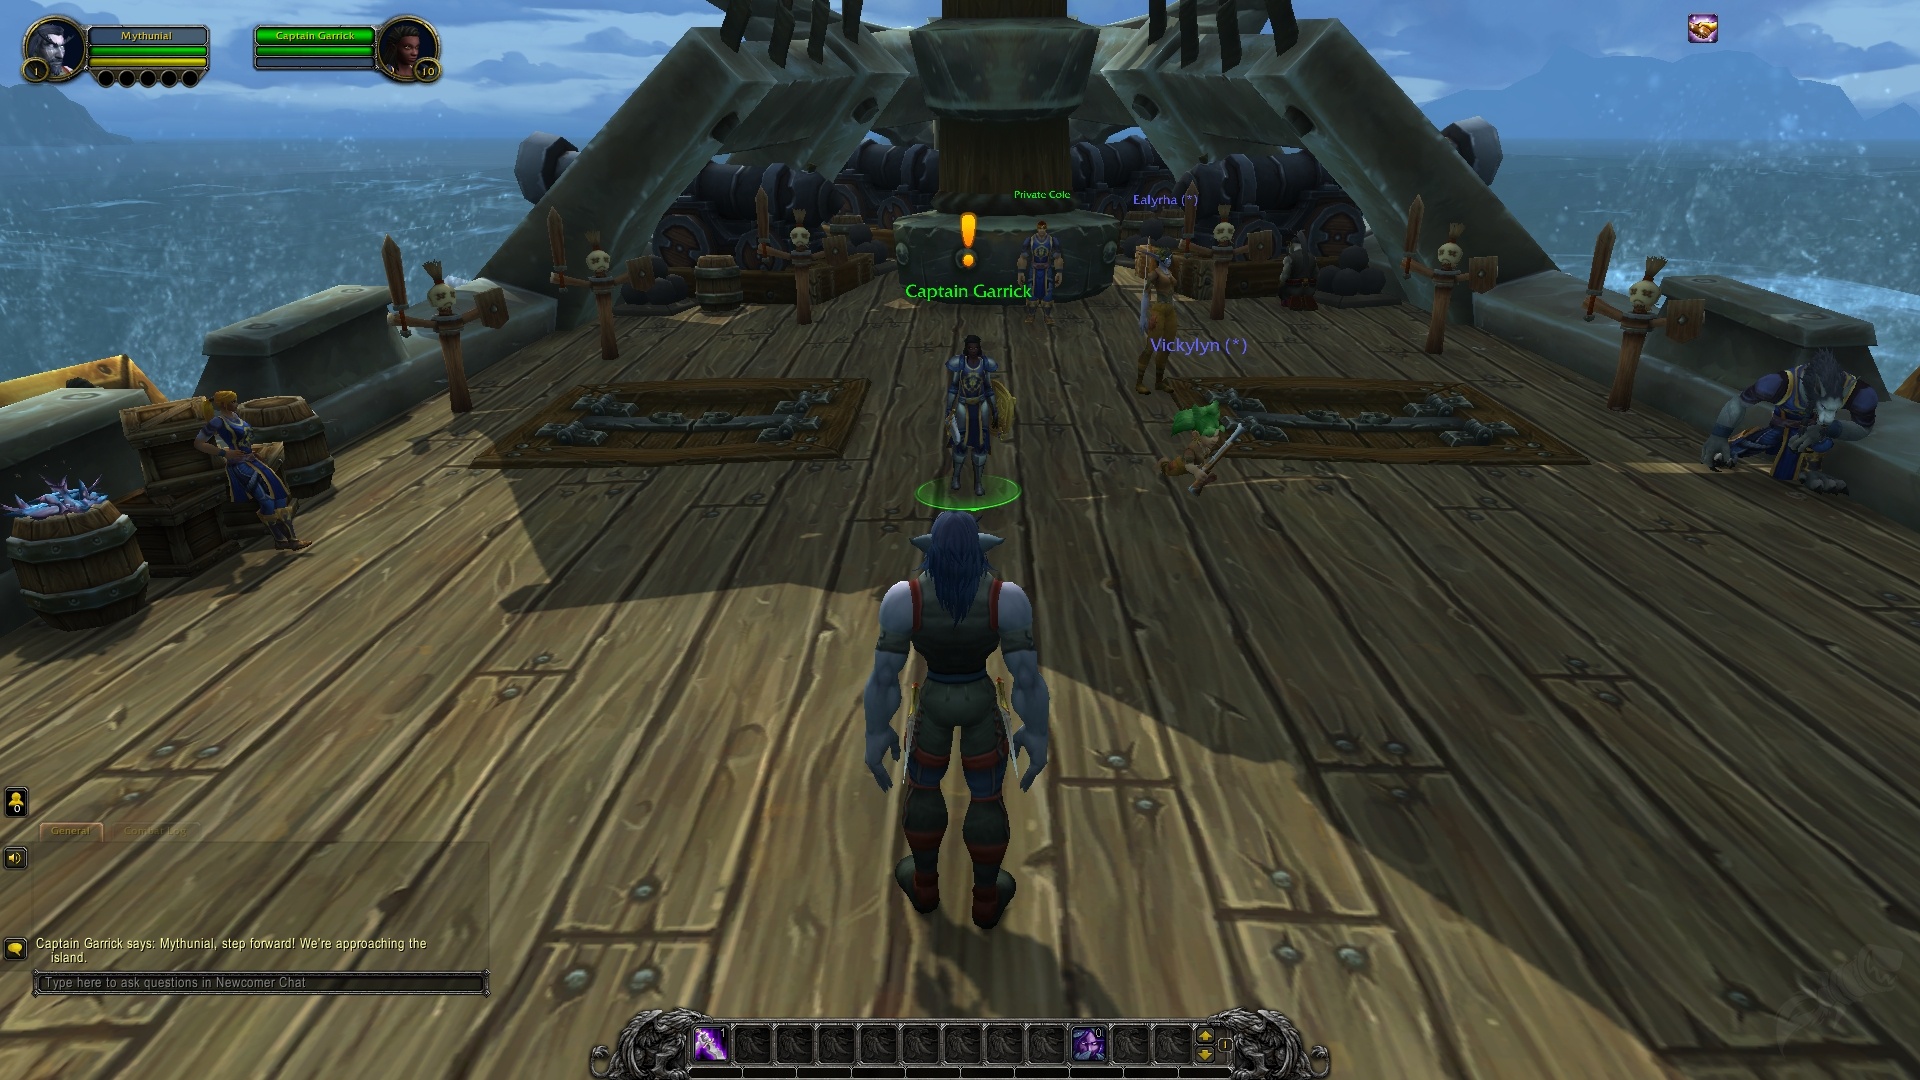 A General Guide to Leveling in World of Warcraft - World of